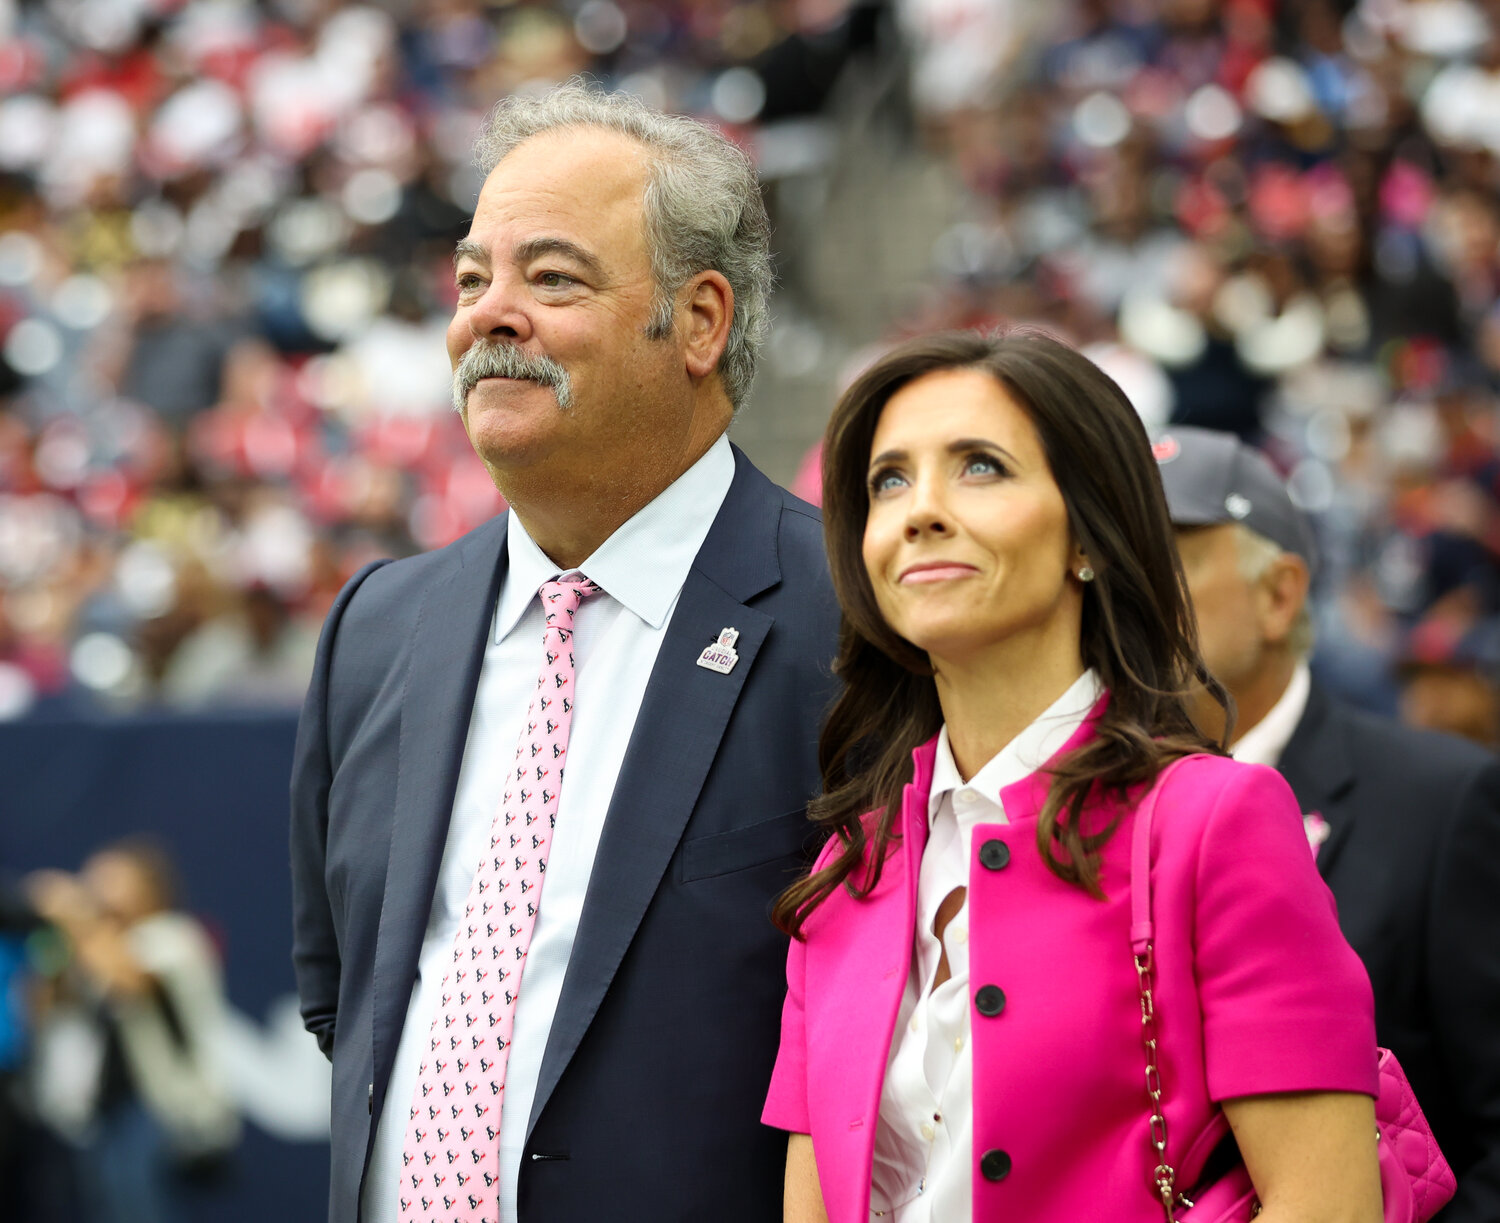 Houston Texans CEO and Chairman CAL MCNAIR stands with his wife, HANNAH MCNAIR, on the sidelines during an NFL game between the Texans and the Saints on October 15, 2023 in Houston. The Texans won, 20-13.